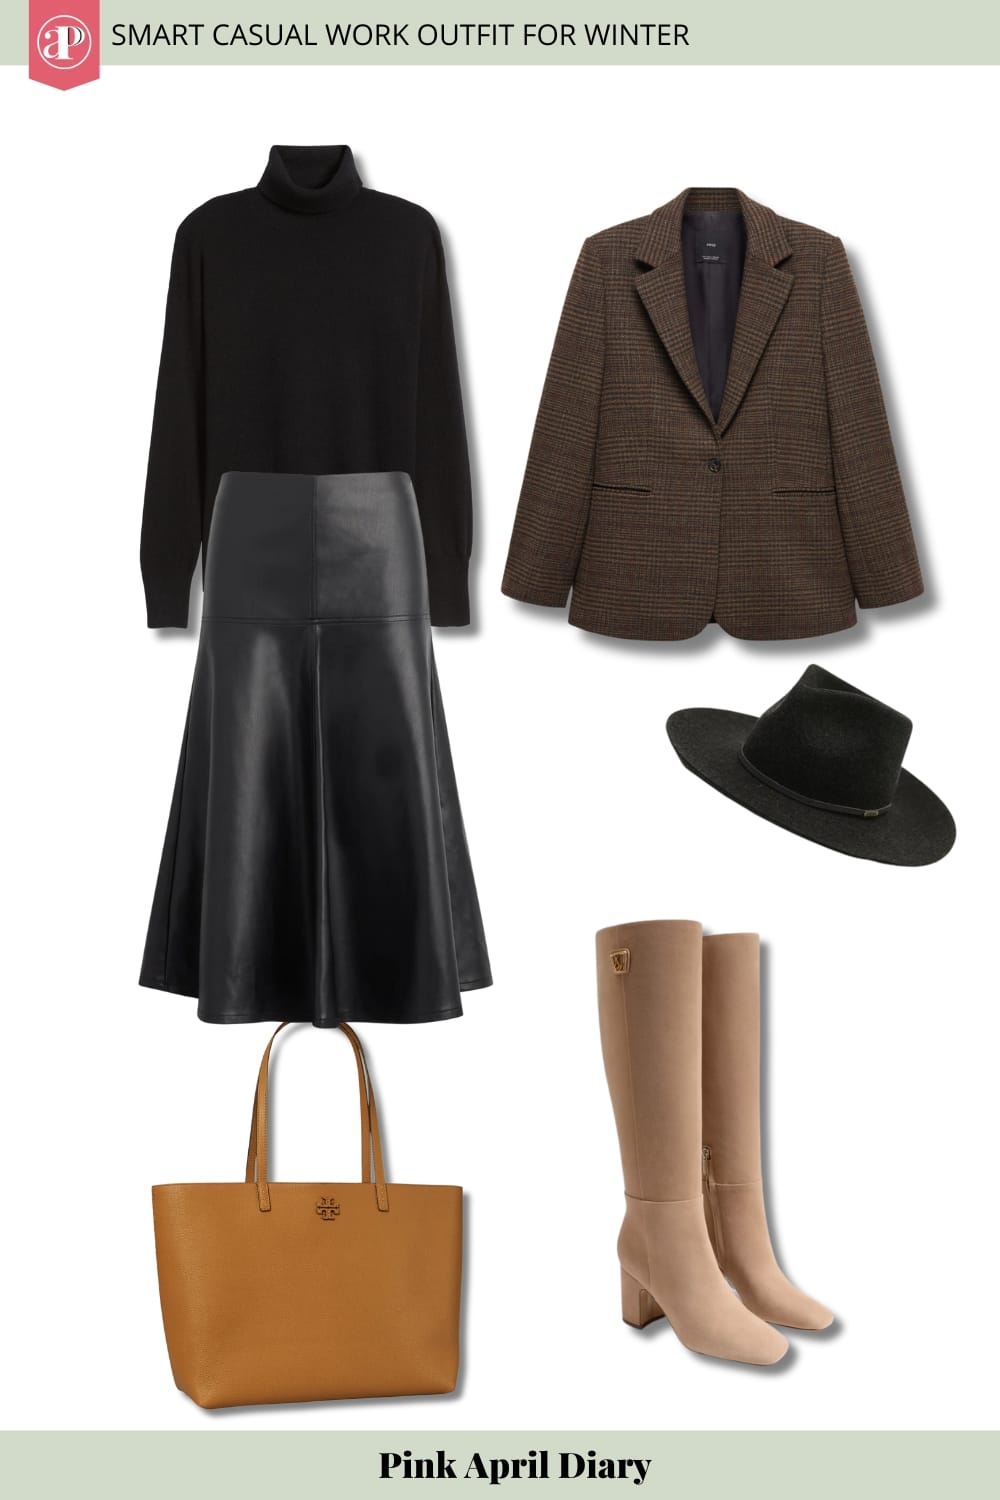 Smart Casual Winter Work Outfit 7